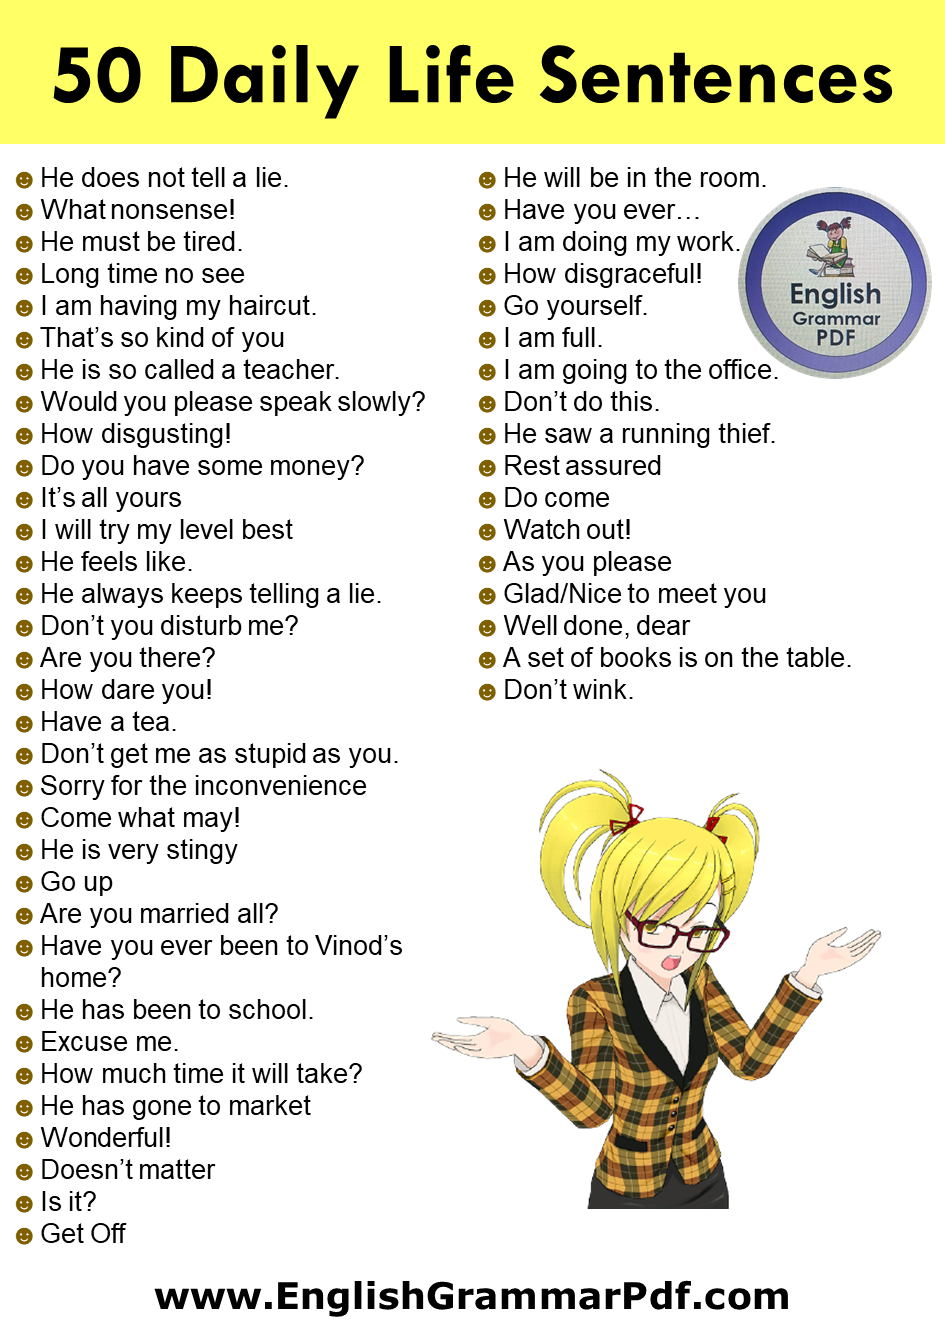 50 English Sentences Used in Daily Life